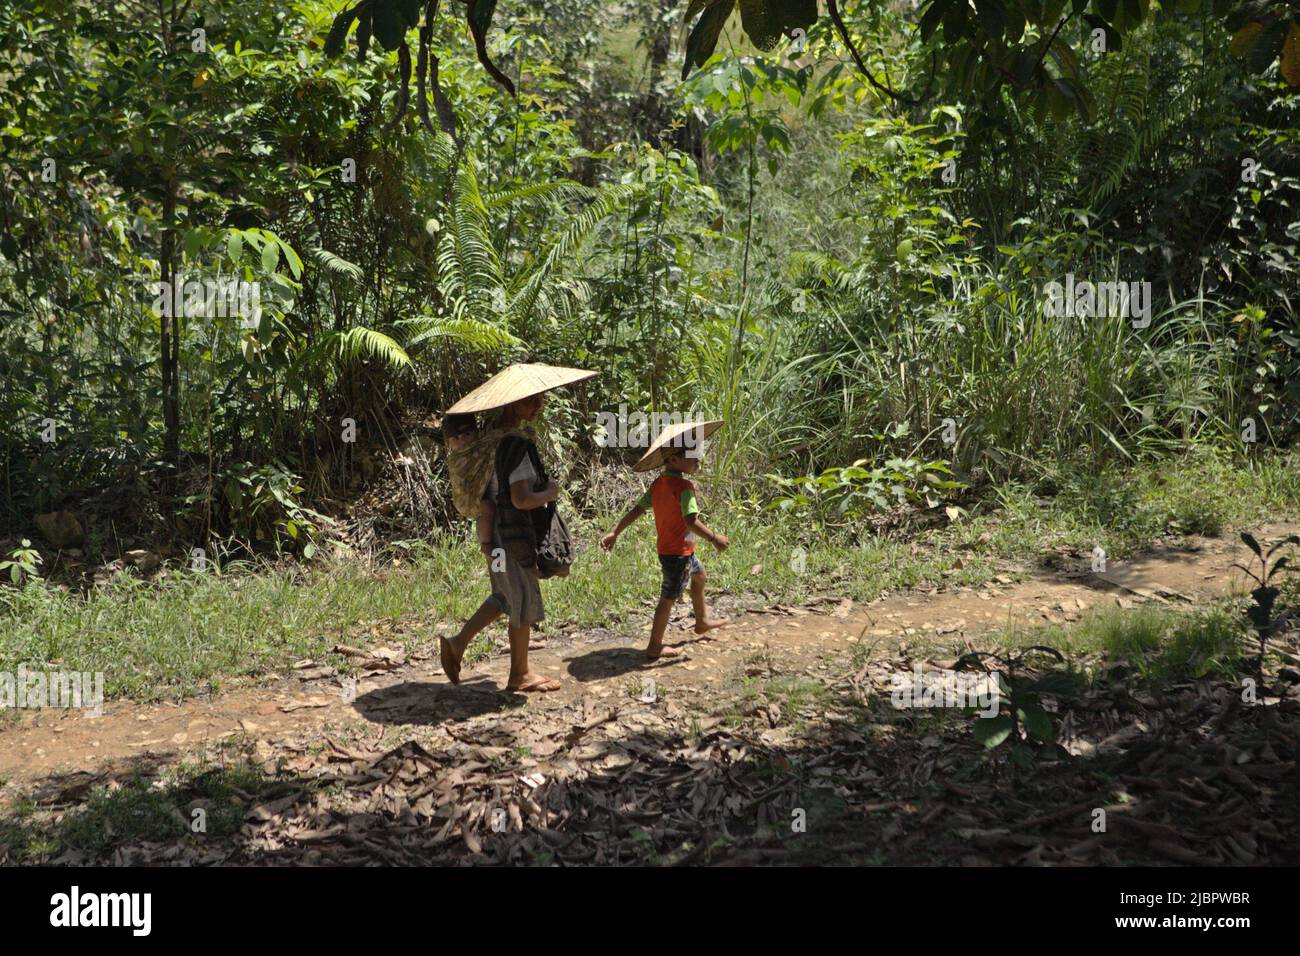 A woman and a child wearing conical hats as they are walking on rural pathway in Nanga Raun village, Kalis, Kapuas Hulu, West Kalimantan, Indonesia. Stock Photo